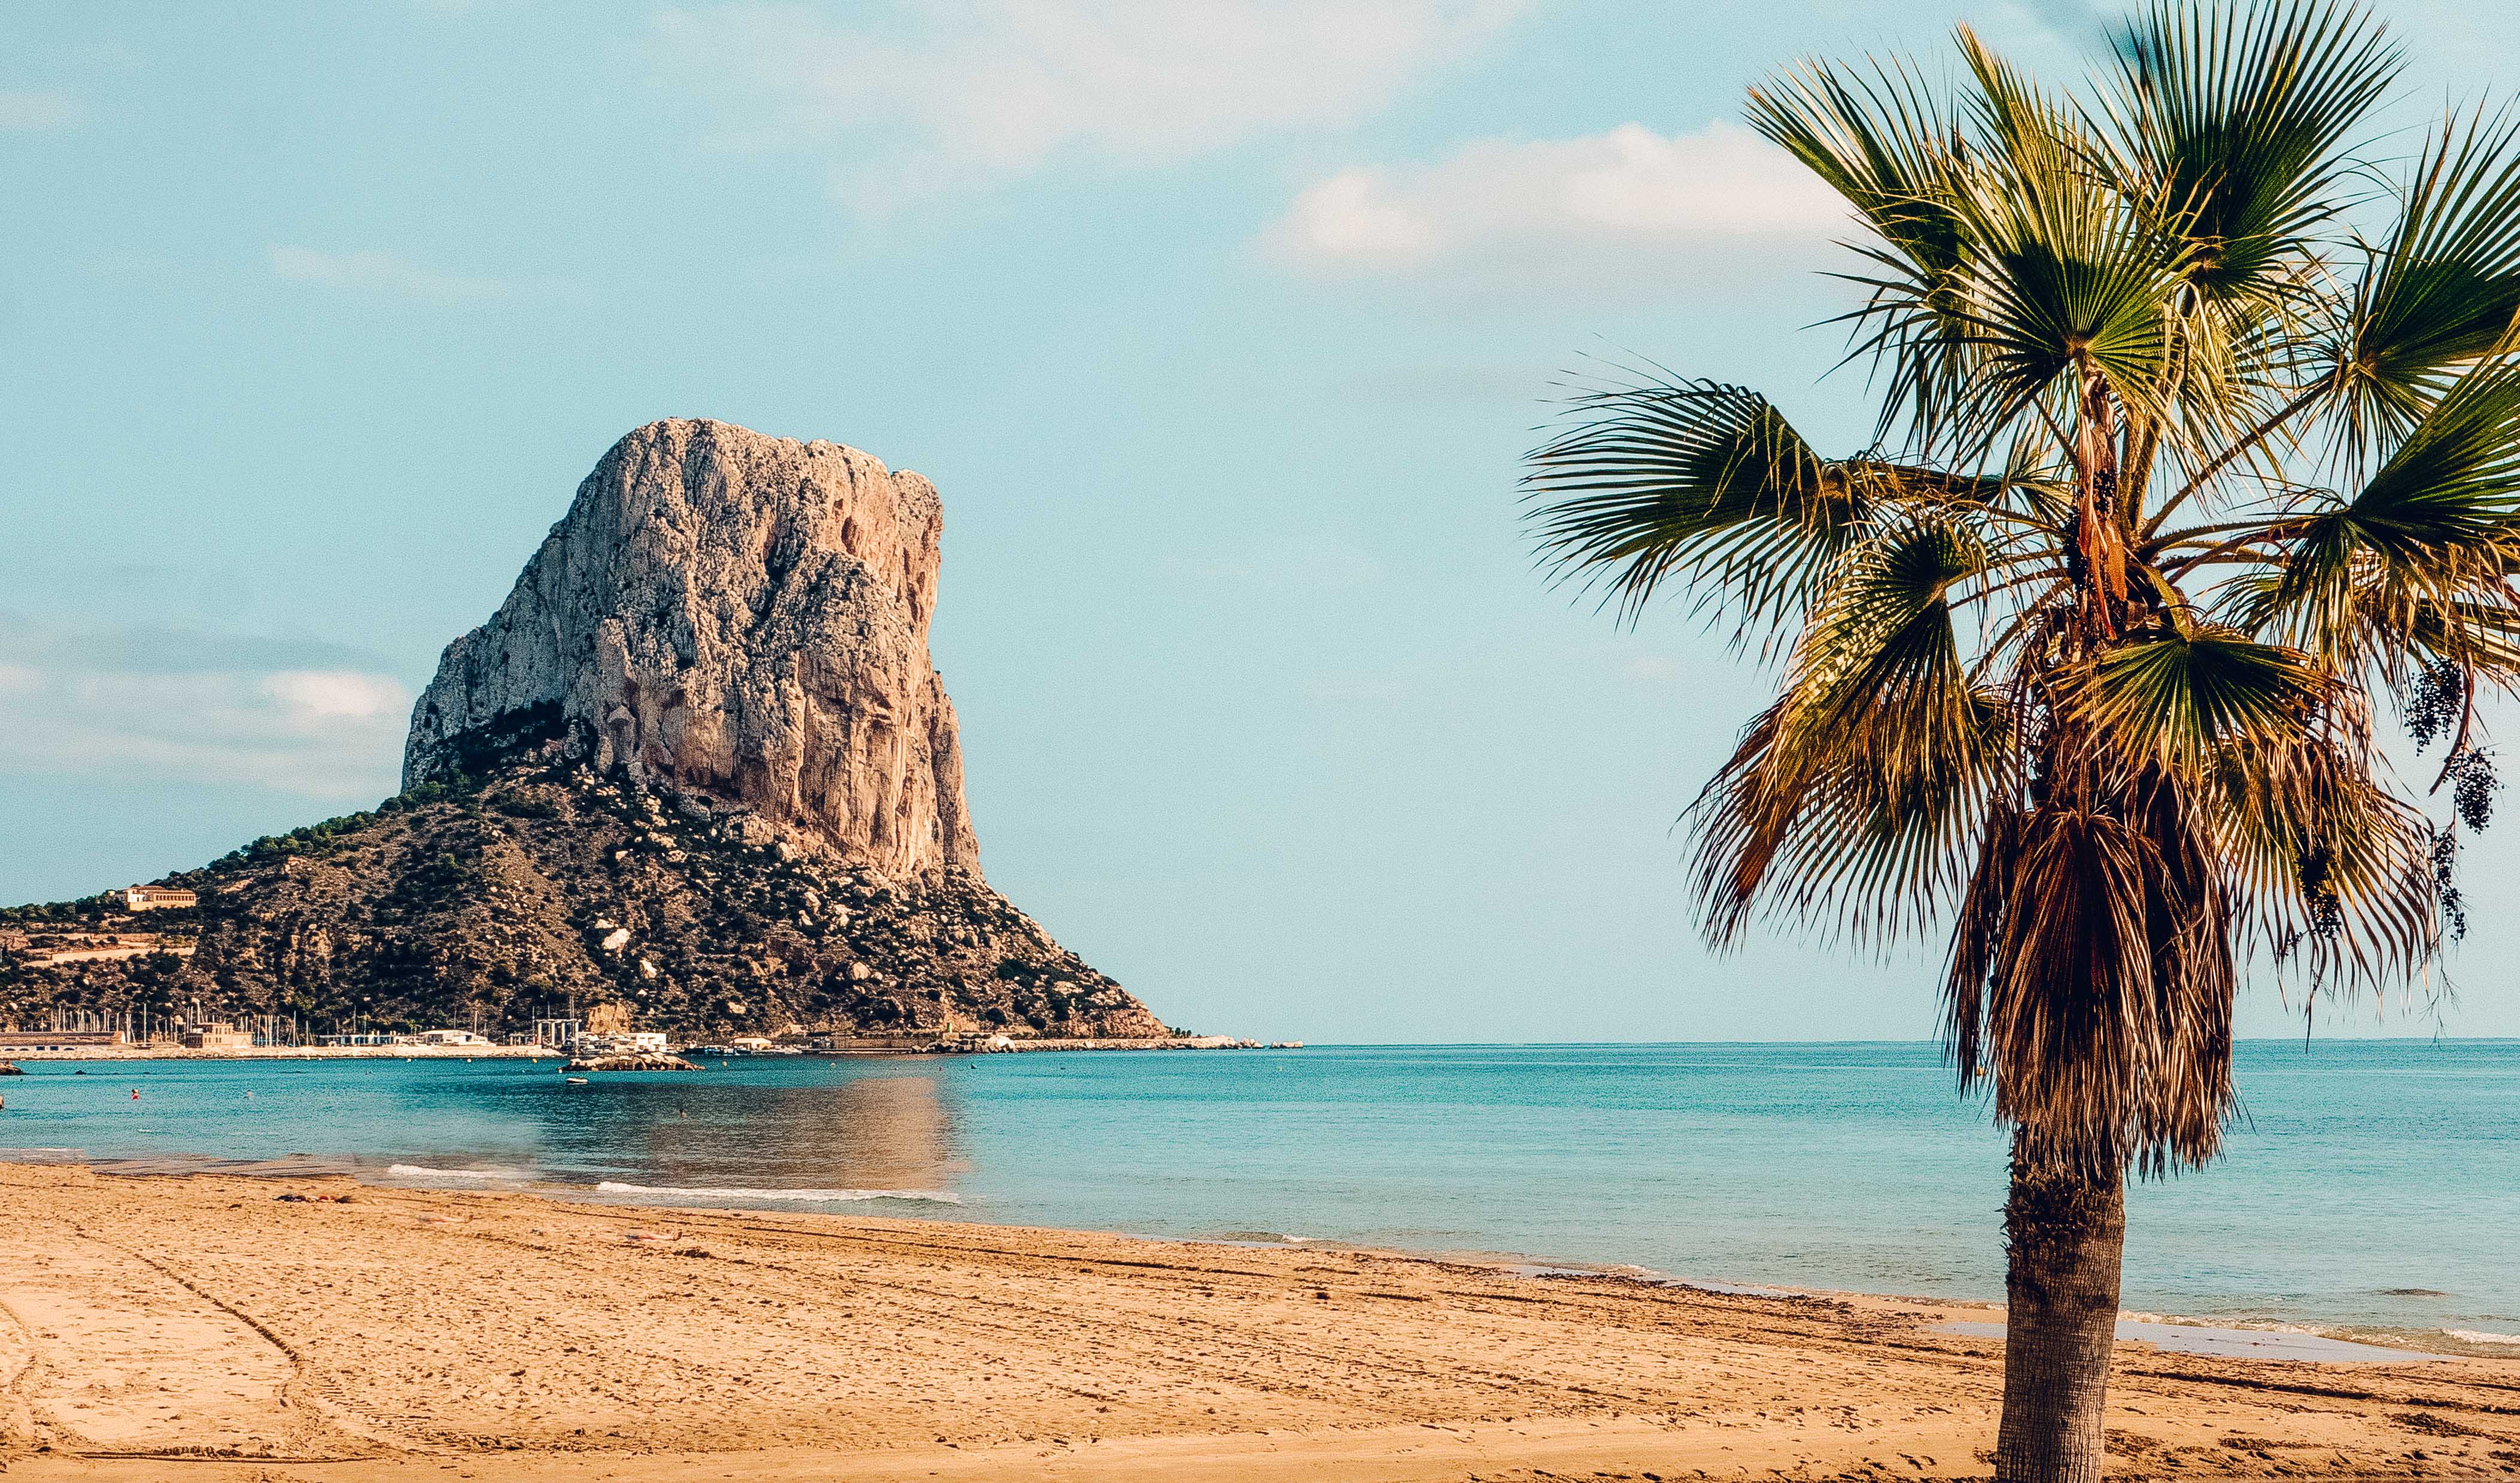 Sweep of golden sand and palm tree in front of the towering rock of the Penon d'Ifac. 